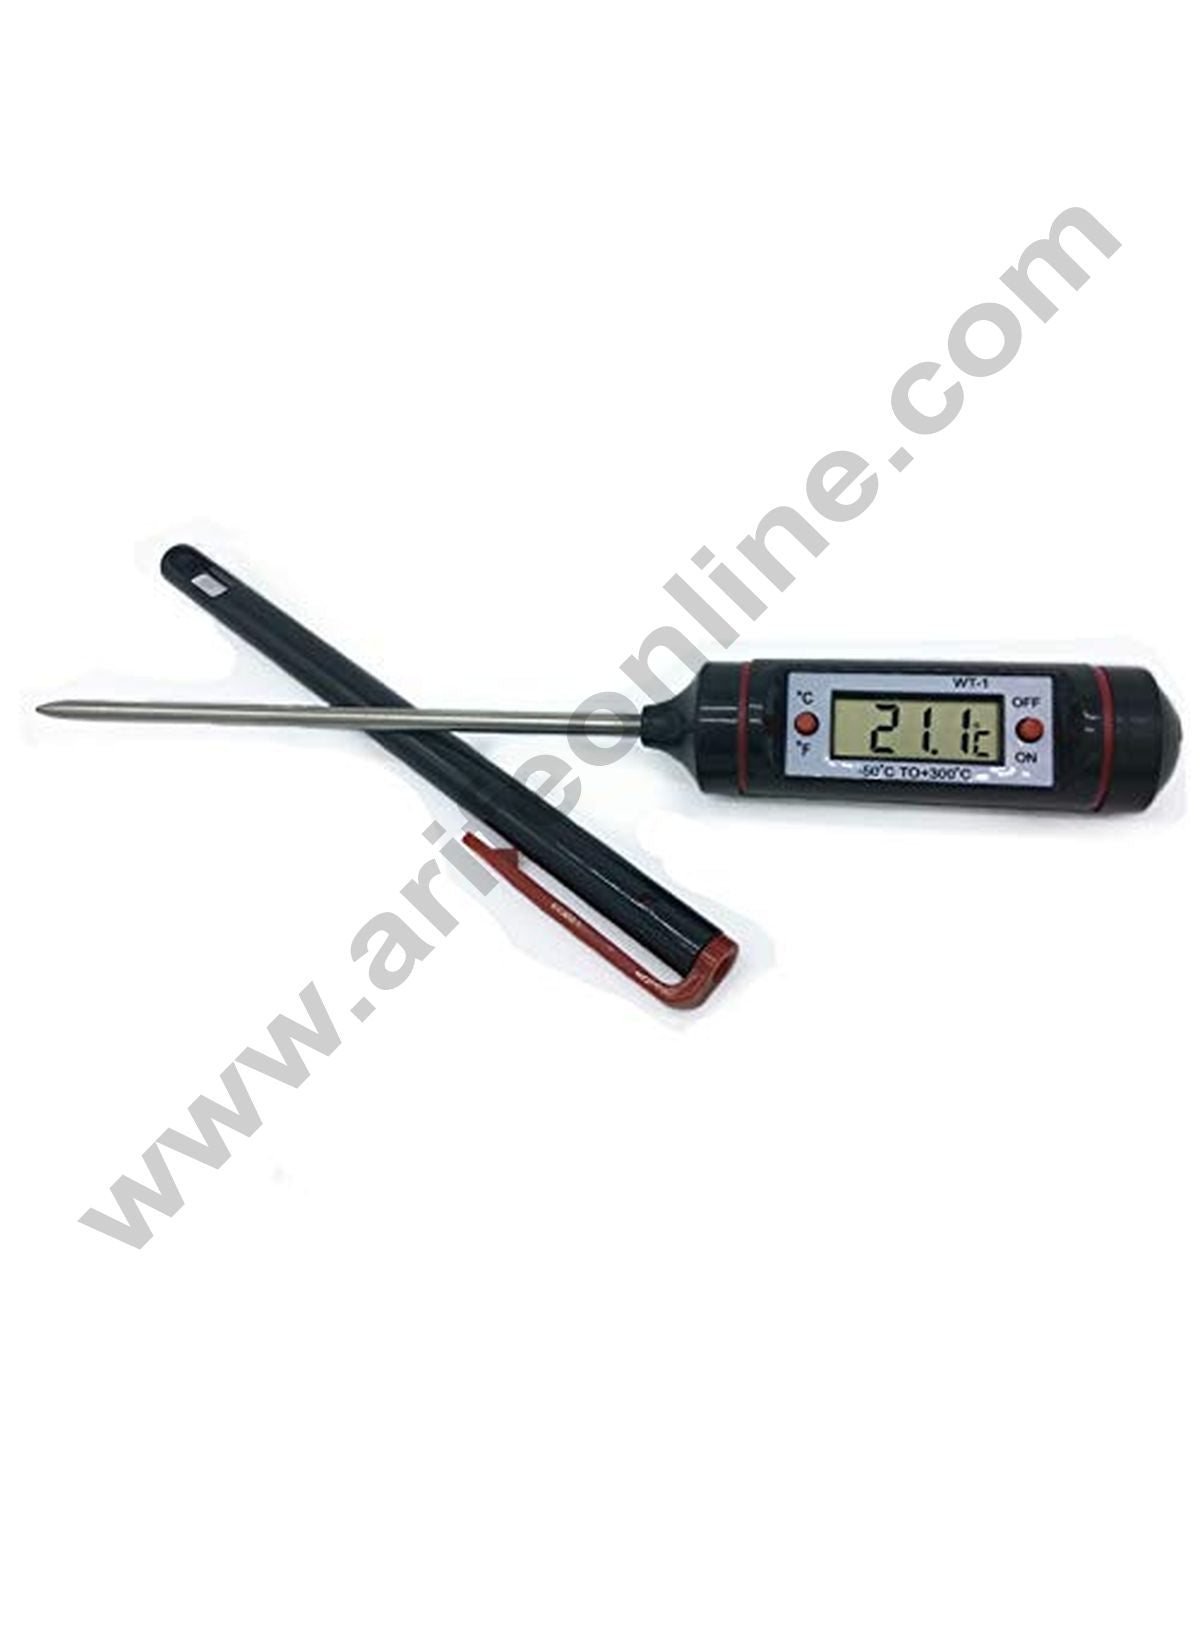 Buy Nabhu digital baking thermometer for home and kitchen for cooking  temperature Meat Cake Candy Fry Food Online at Lowest Price Ever in India |  Check Reviews & Ratings - Shop The World